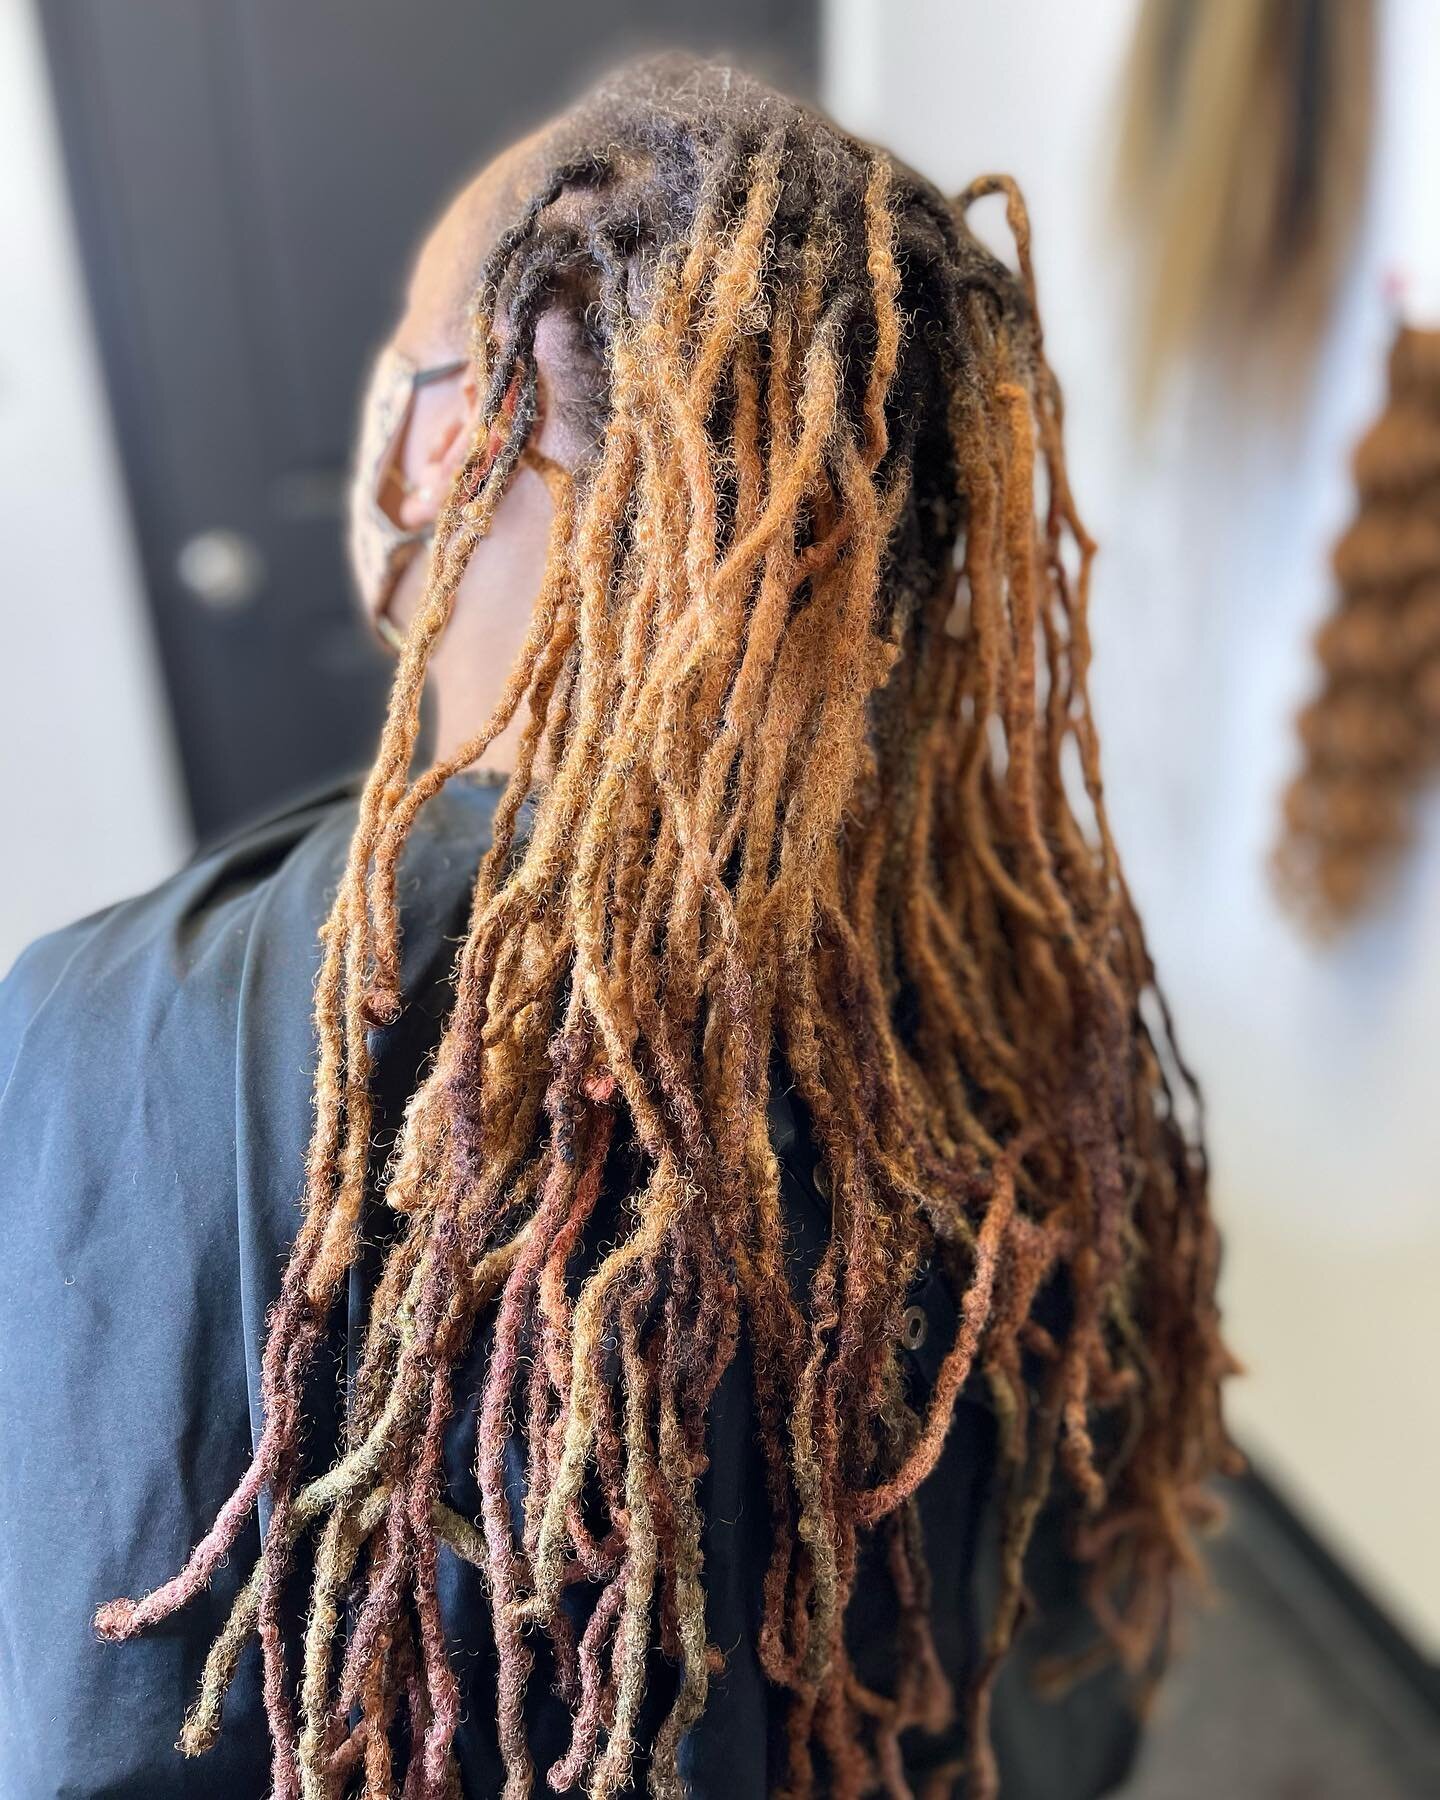 CAN I DO CROCHET OVER LOCS? 
YES MA&rsquo;AM 🙌🏾 
_____
𝐍𝐎𝐓 𝐀 𝗪𝐄𝐀𝐕𝐄, 𝐍𝐎𝐓 𝐀 𝗪𝐈𝐆,𝐘𝐄𝐒 𝟏𝟎𝟎% 𝐂𝐑𝐎𝐂𝐇𝐄𝐓 𝐁𝐑𝐈𝐀𝐃𝐒. 𝐍𝐎 𝐇𝐀𝐈𝐑 𝐋𝐄𝐅𝐓 𝐎𝐔𝐓 ⁣⁣
⁣
𝘚𝘵𝘺𝘭𝘦: Cleopatra waves Crochet braids 
𝘊𝘰𝘭𝘰𝘳: 30,27,33,4
𝘈𝘥𝘥 ?